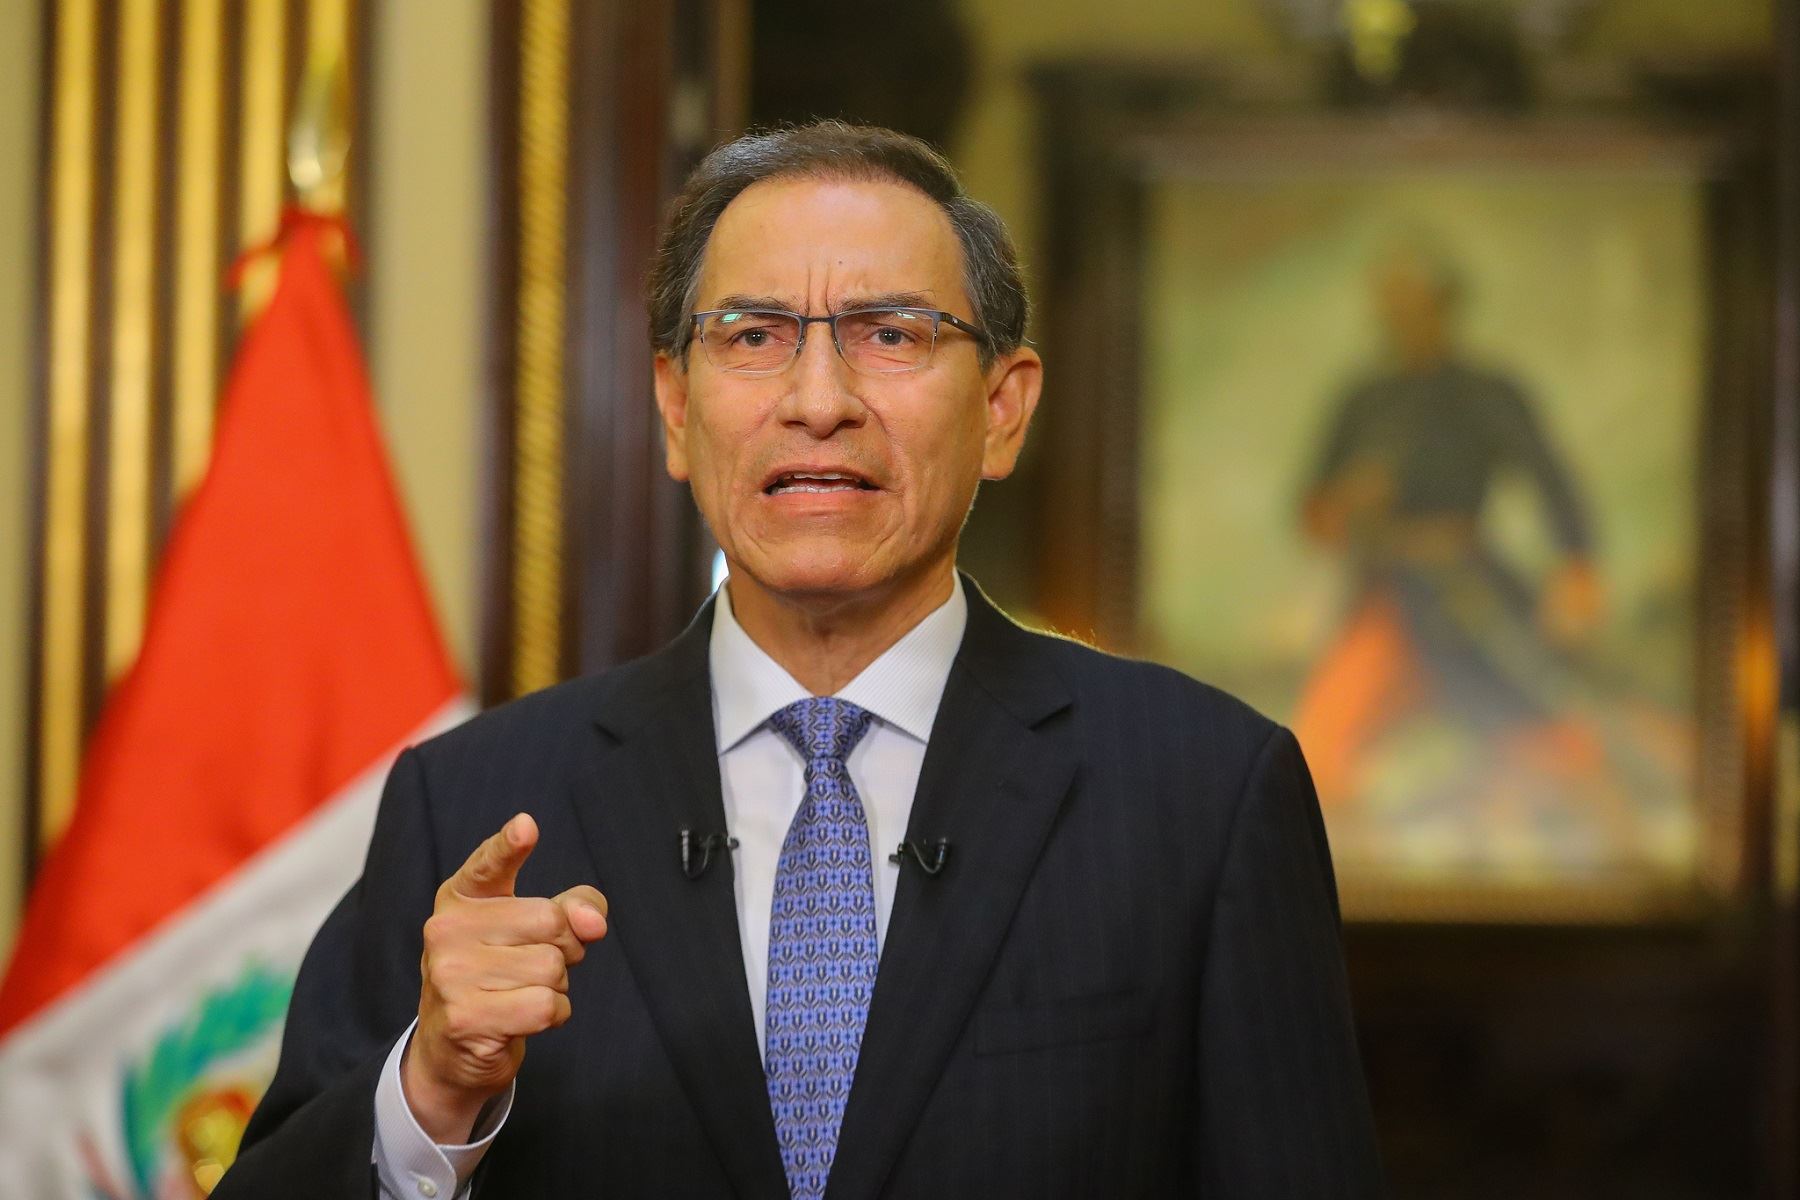 Peru President Administration to deliver economically stabilized